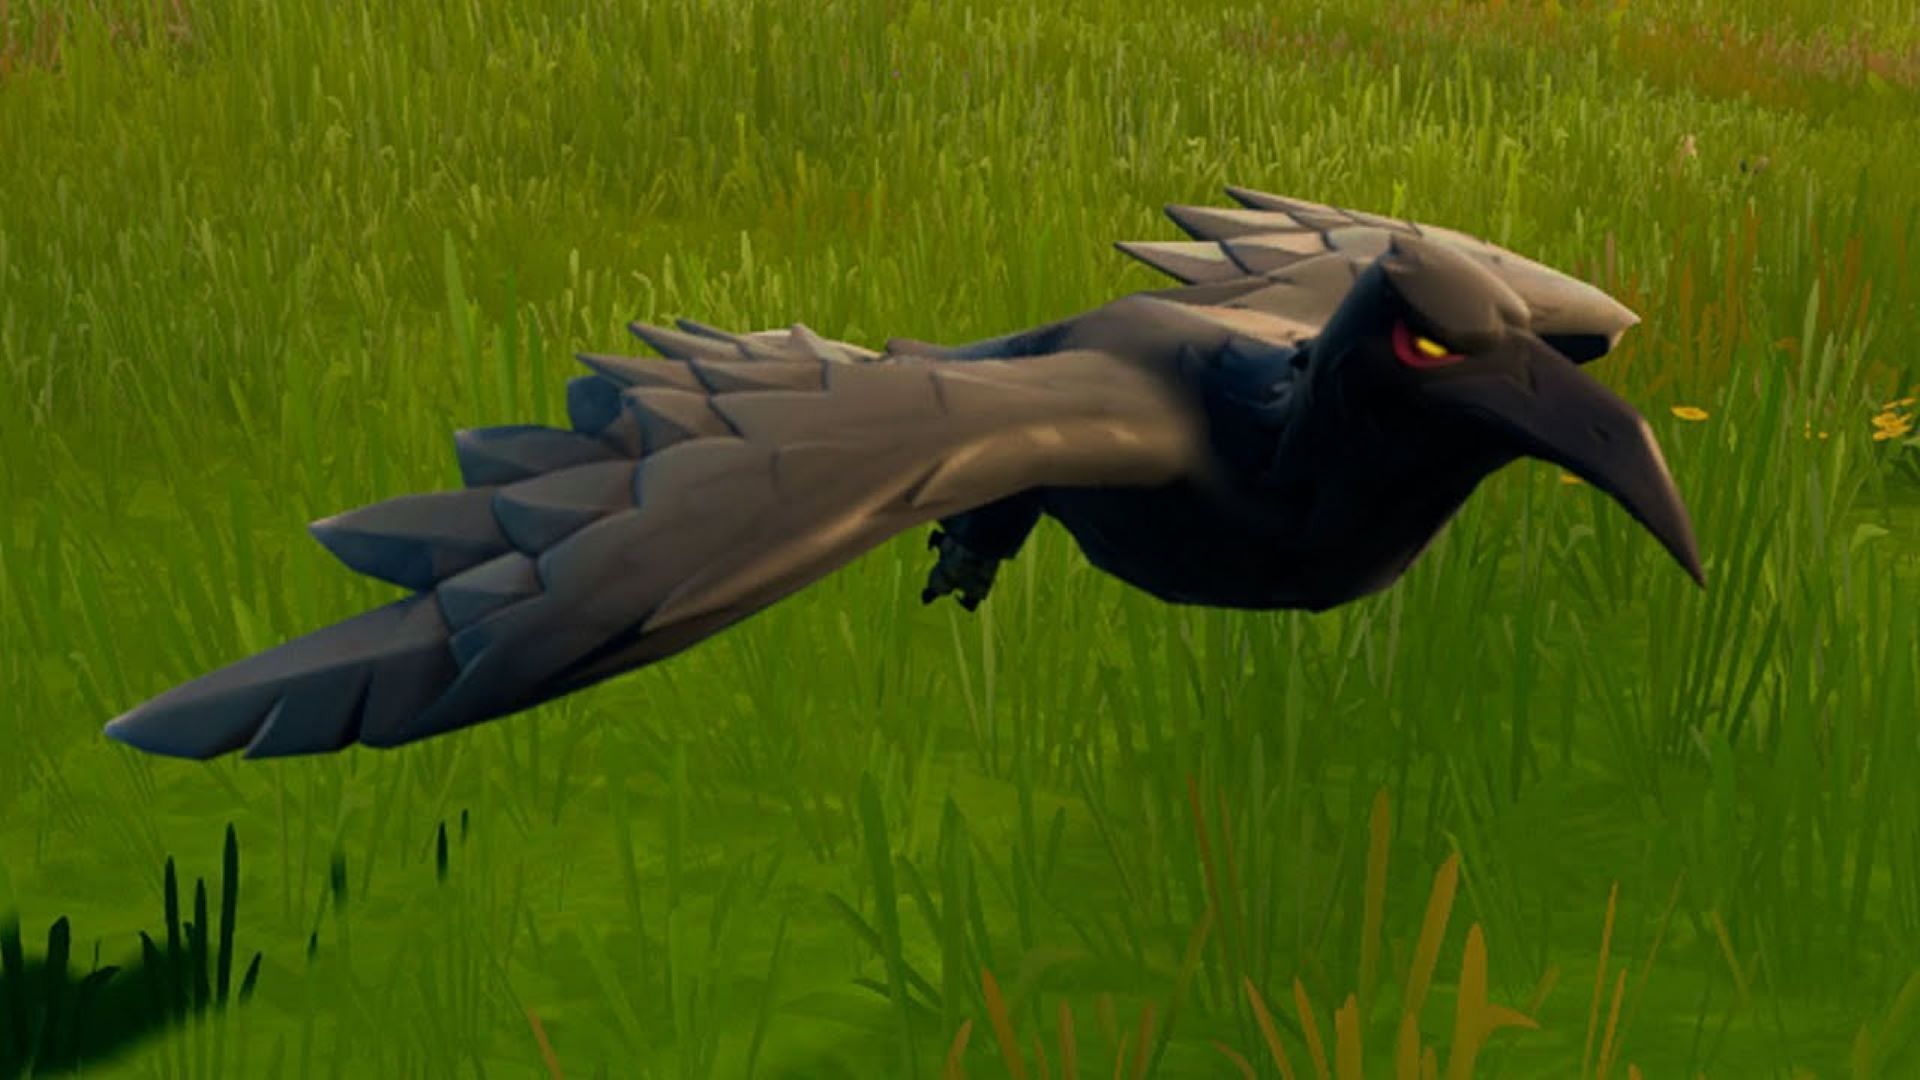 Gamers can ride crows and wildlife using Spider-Man&#039;s mythic web-shooters (Image via Fortnite Events/YouTube)